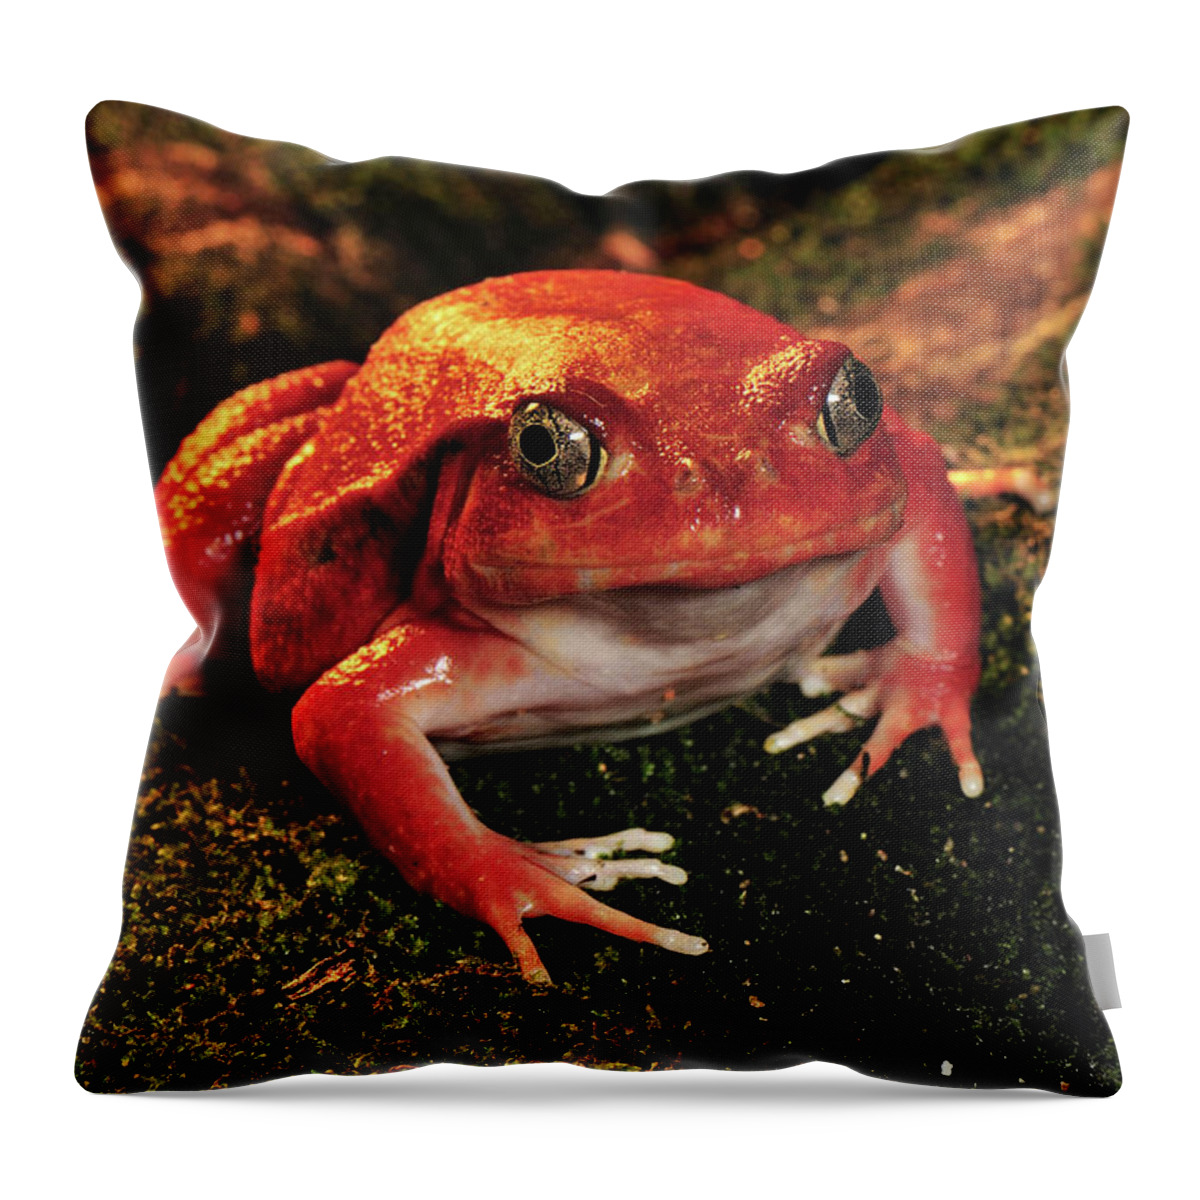 Mp Throw Pillow featuring the photograph Tomato Frog Dyscophus Antongilii by Thomas Marent